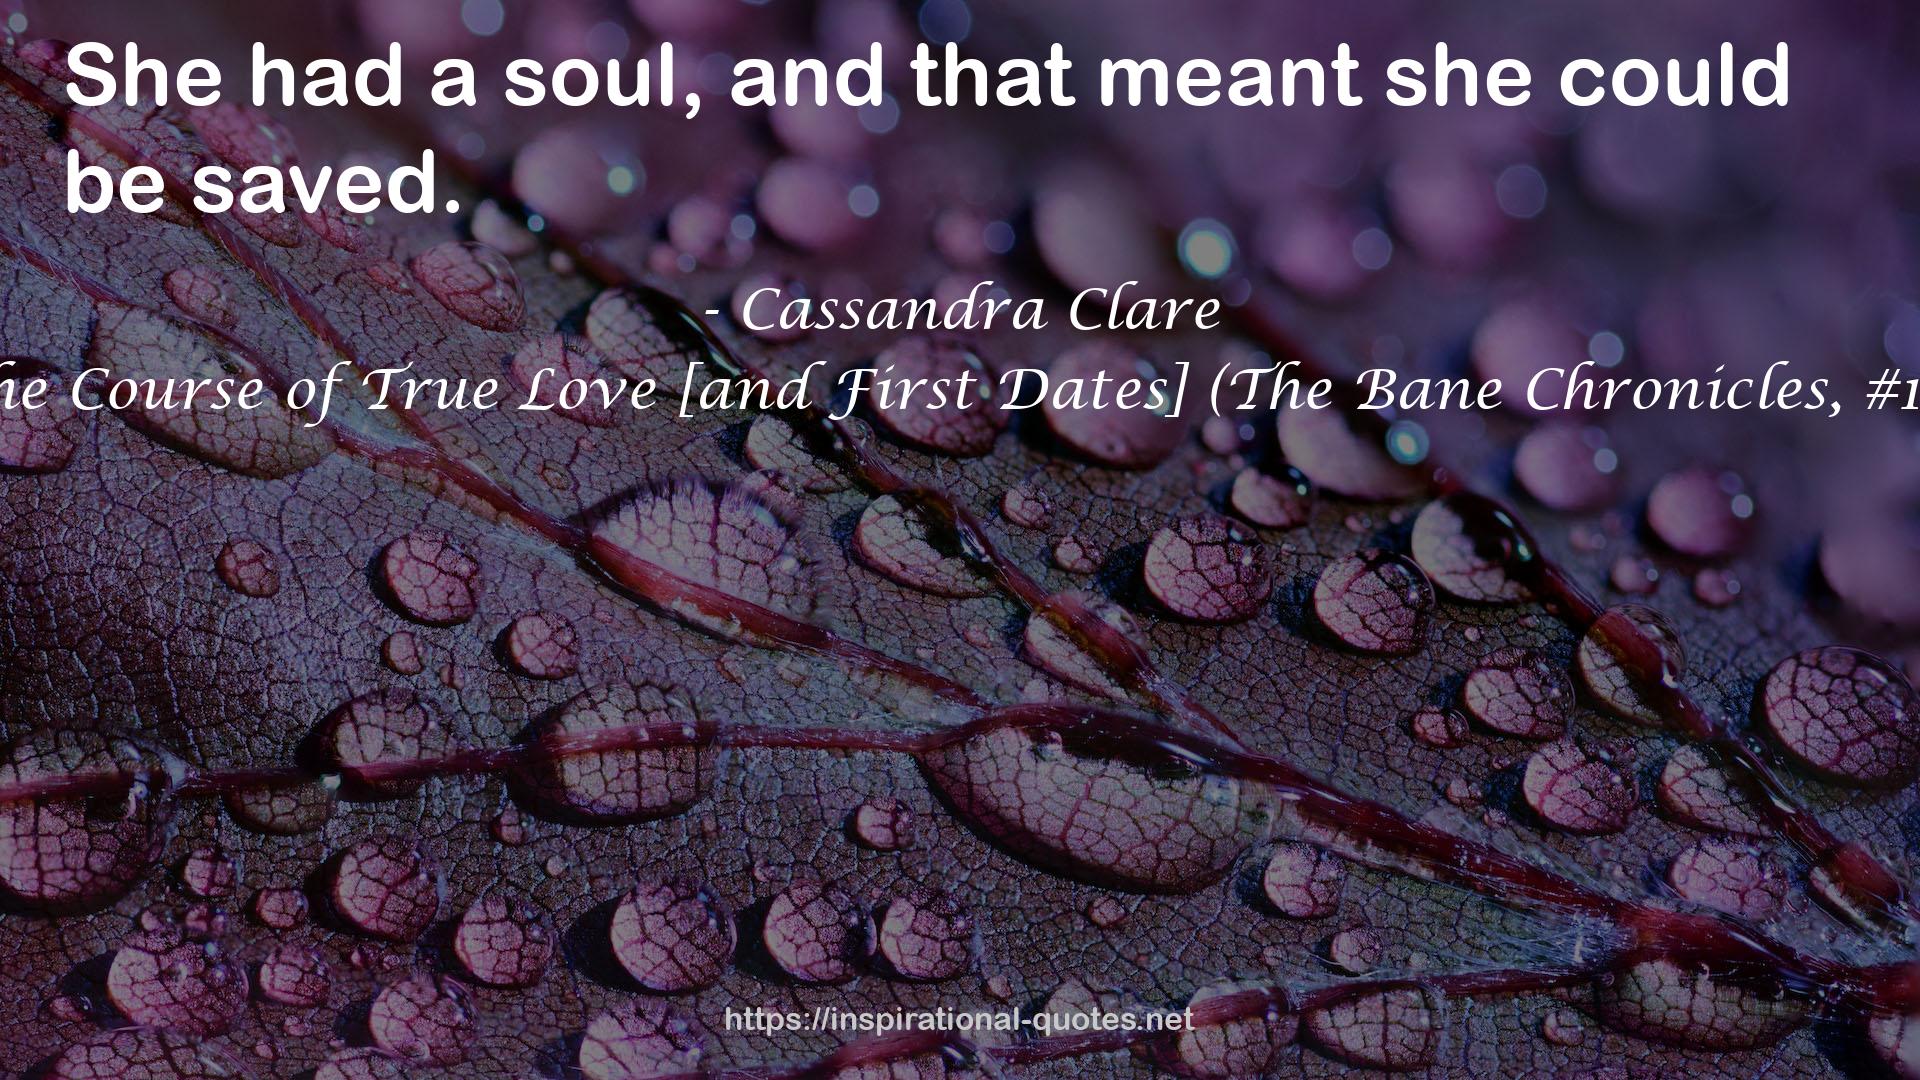 The Course of True Love [and First Dates] (The Bane Chronicles, #10) QUOTES